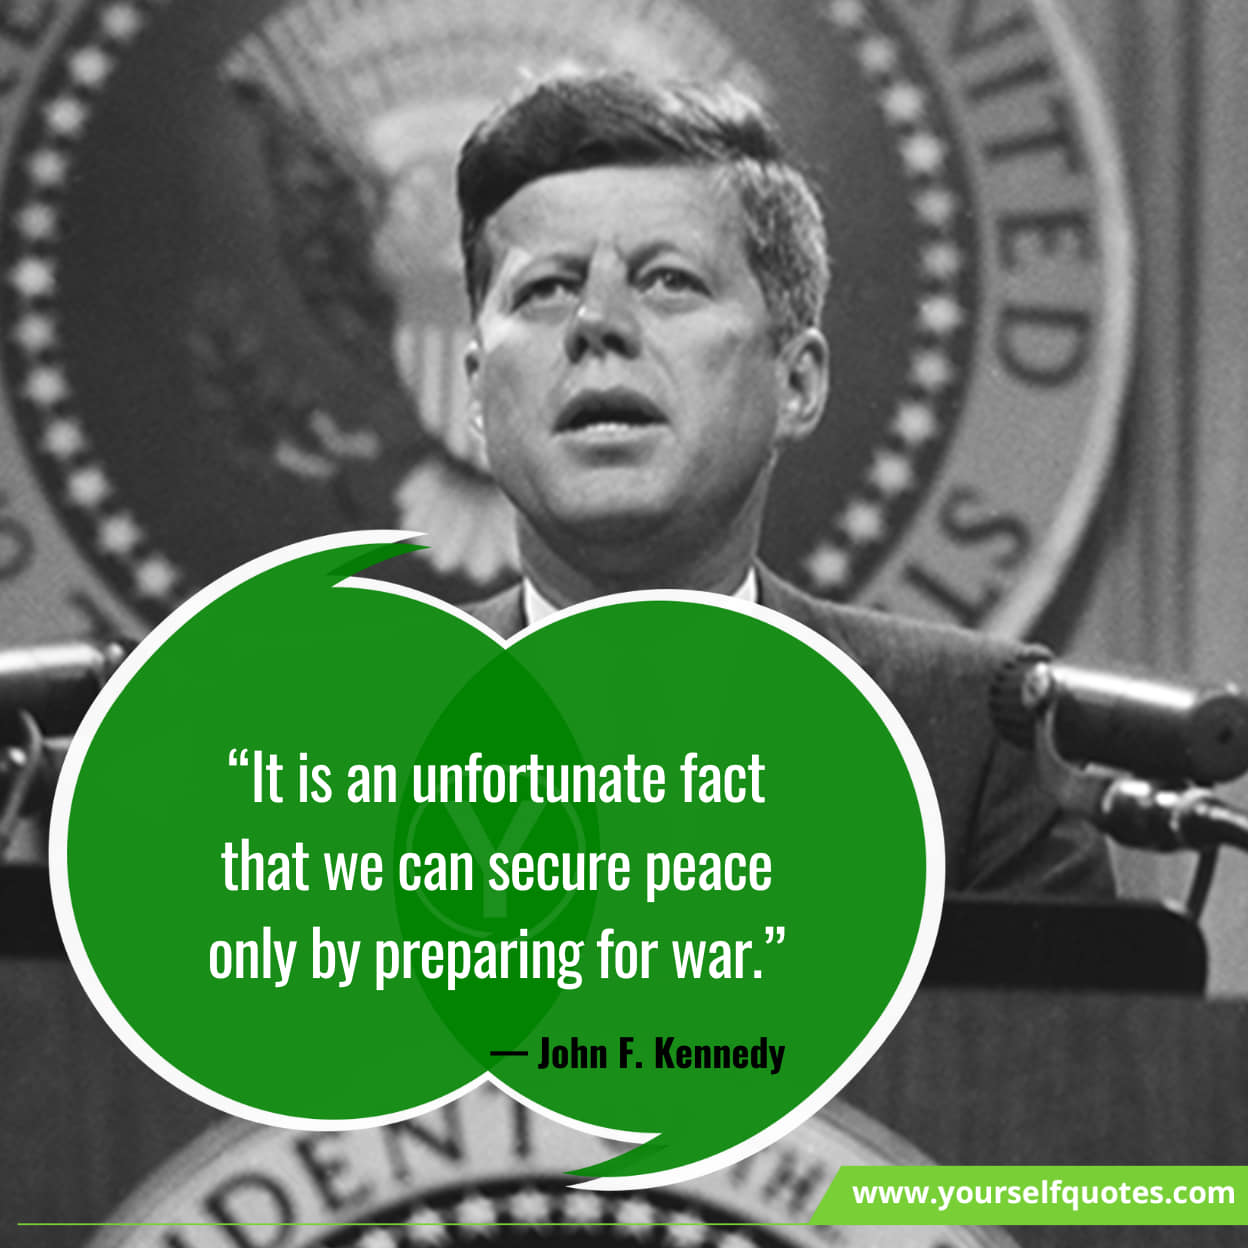 Motivational quotes by John F. Kennedy